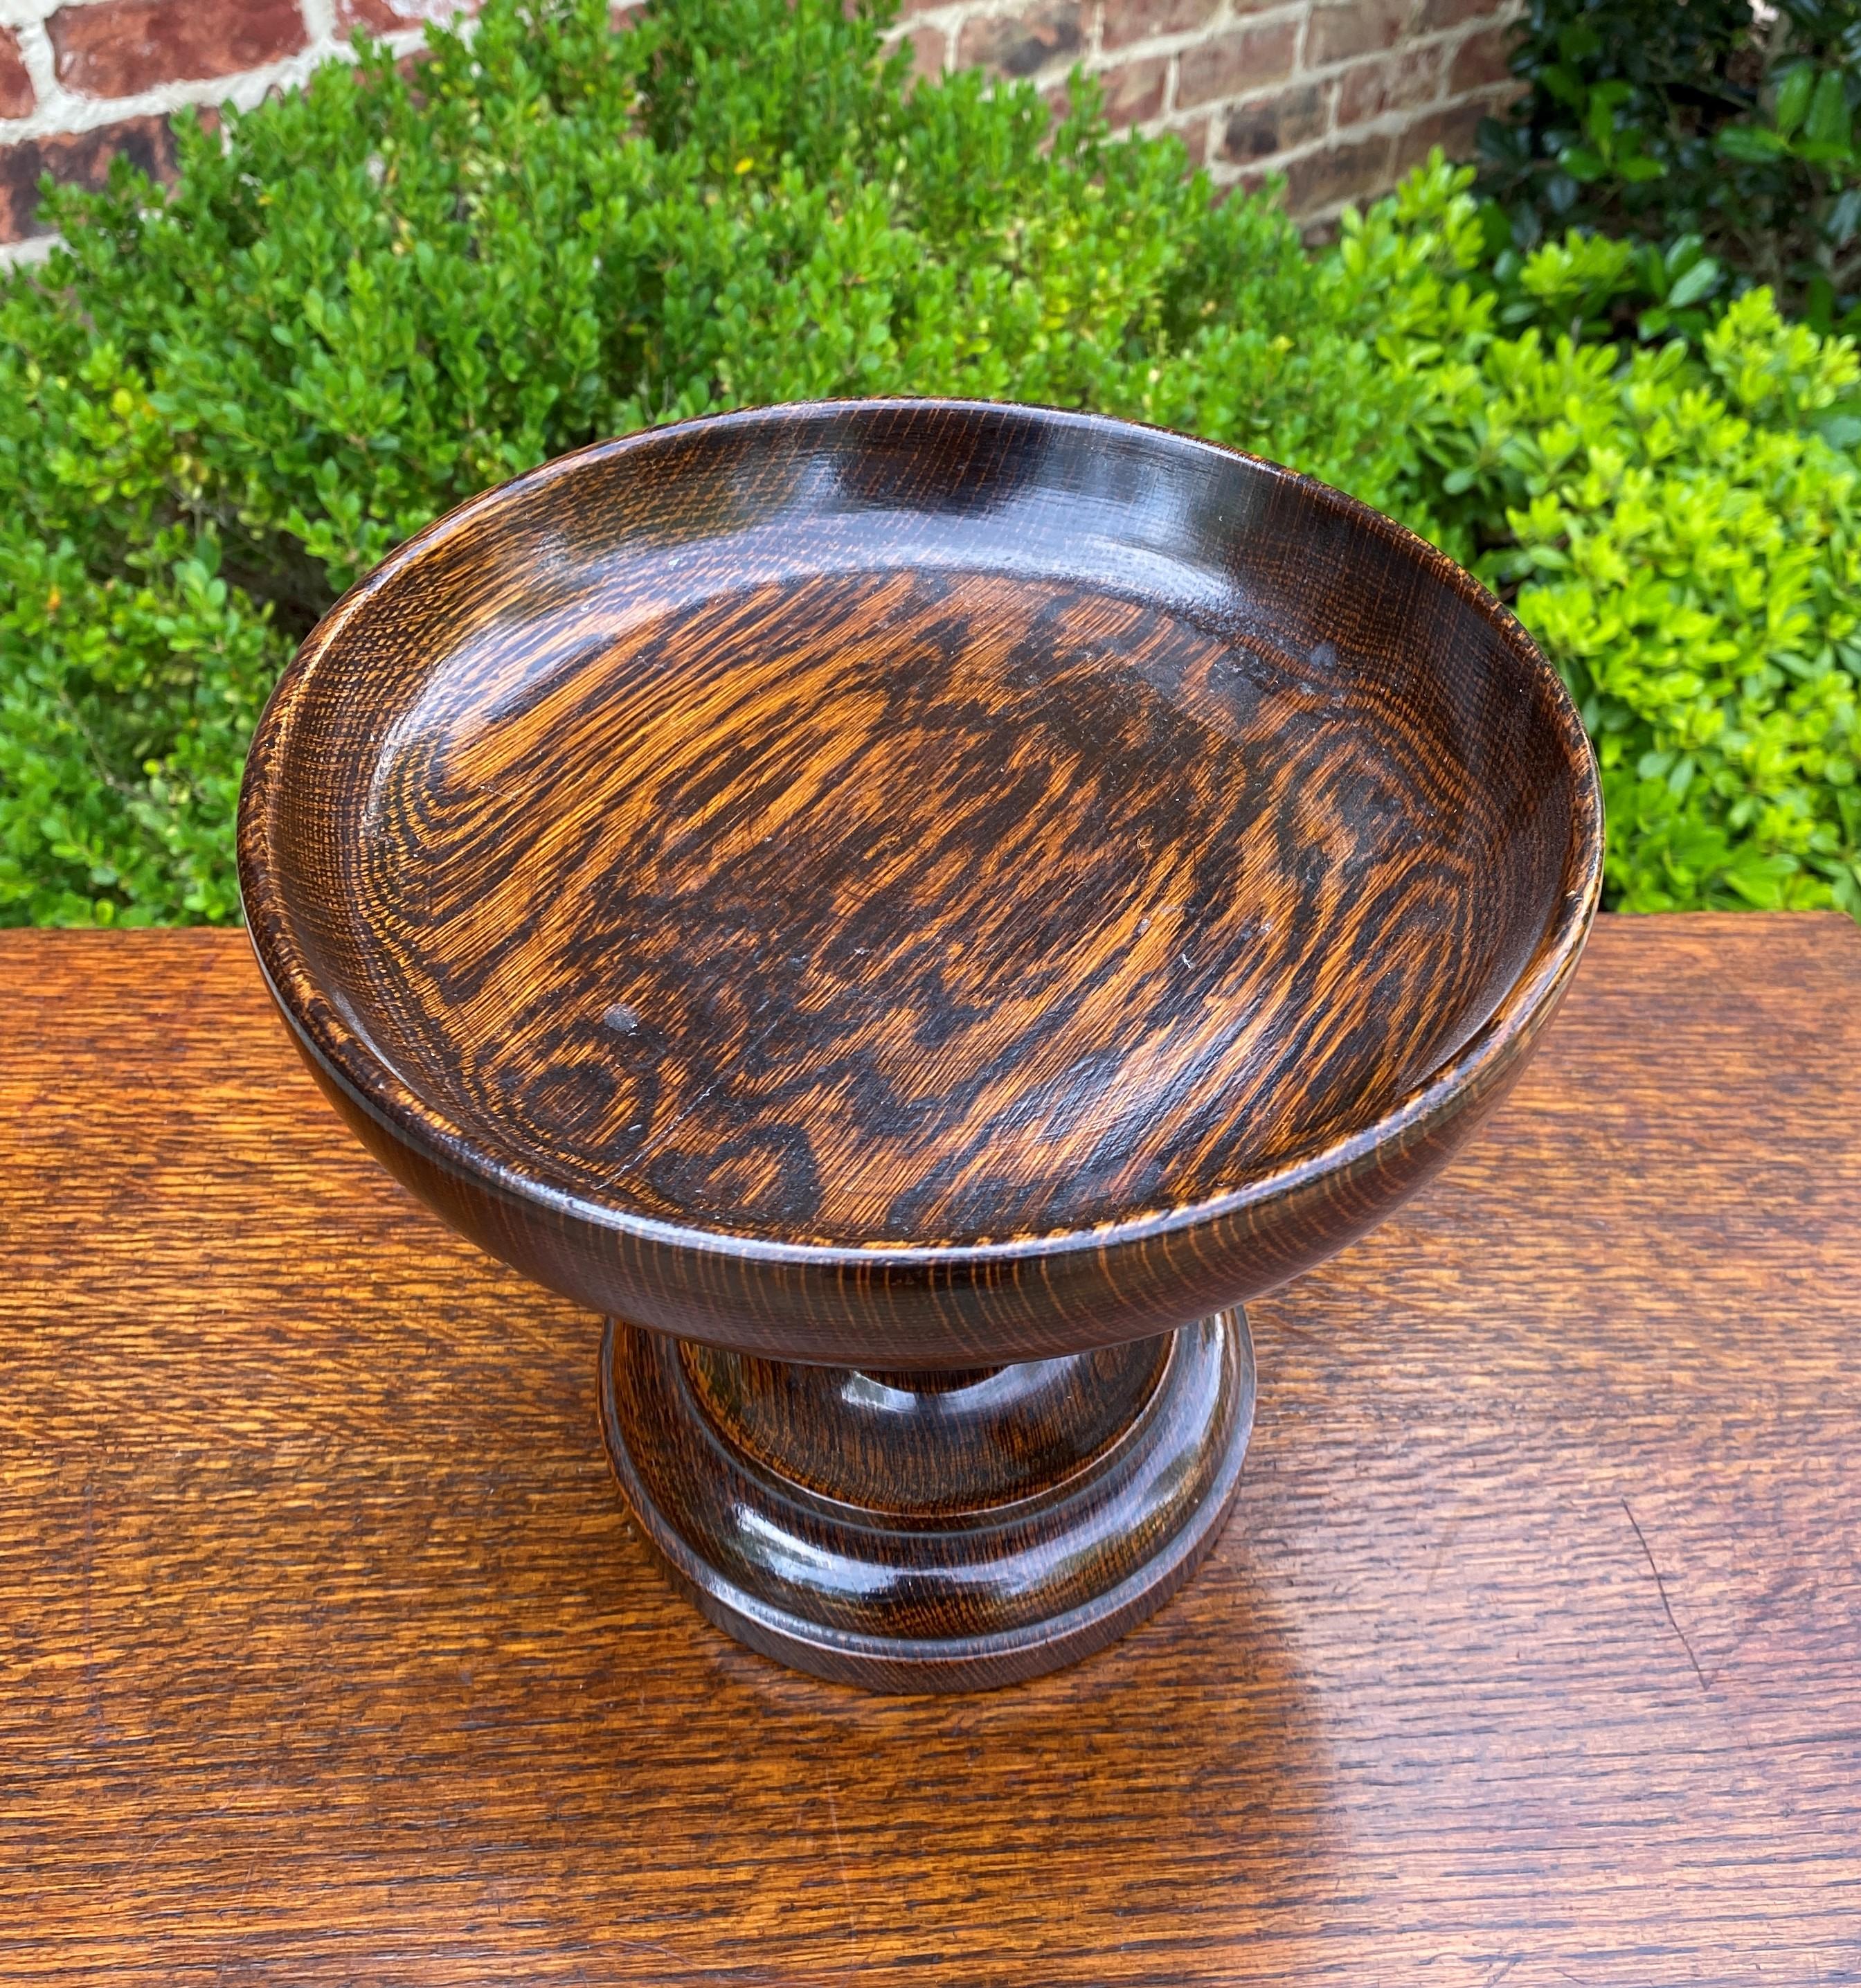 Charming Antique English Oak Barley Twist Compote Pedestal Bowl~~c. 1930s
 

 Charming decorative accent piece for any room in today's home or office

 Measures: 7.5